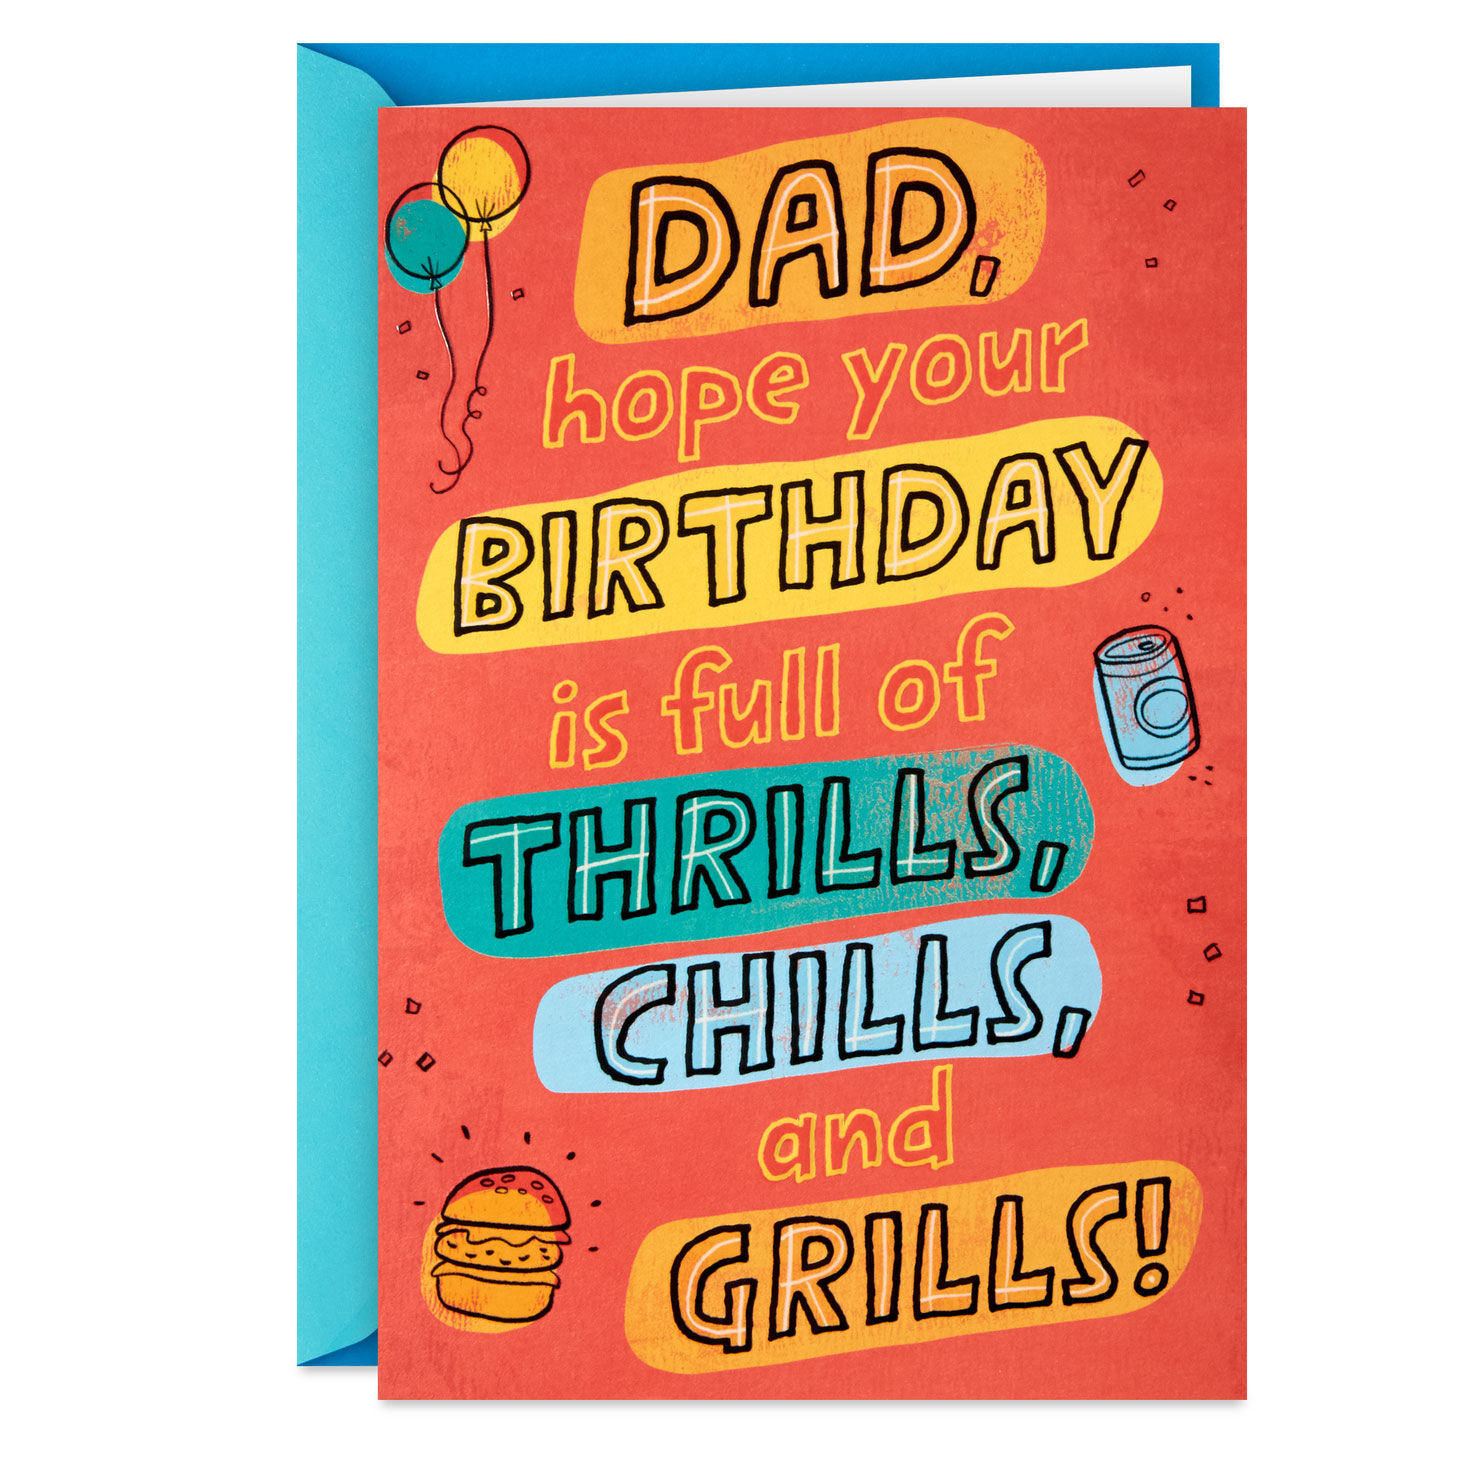 A Day of Thrills, Chills and Grills Pop-Up Birthday Card for Dad for only USD 5.59 | Hallmark